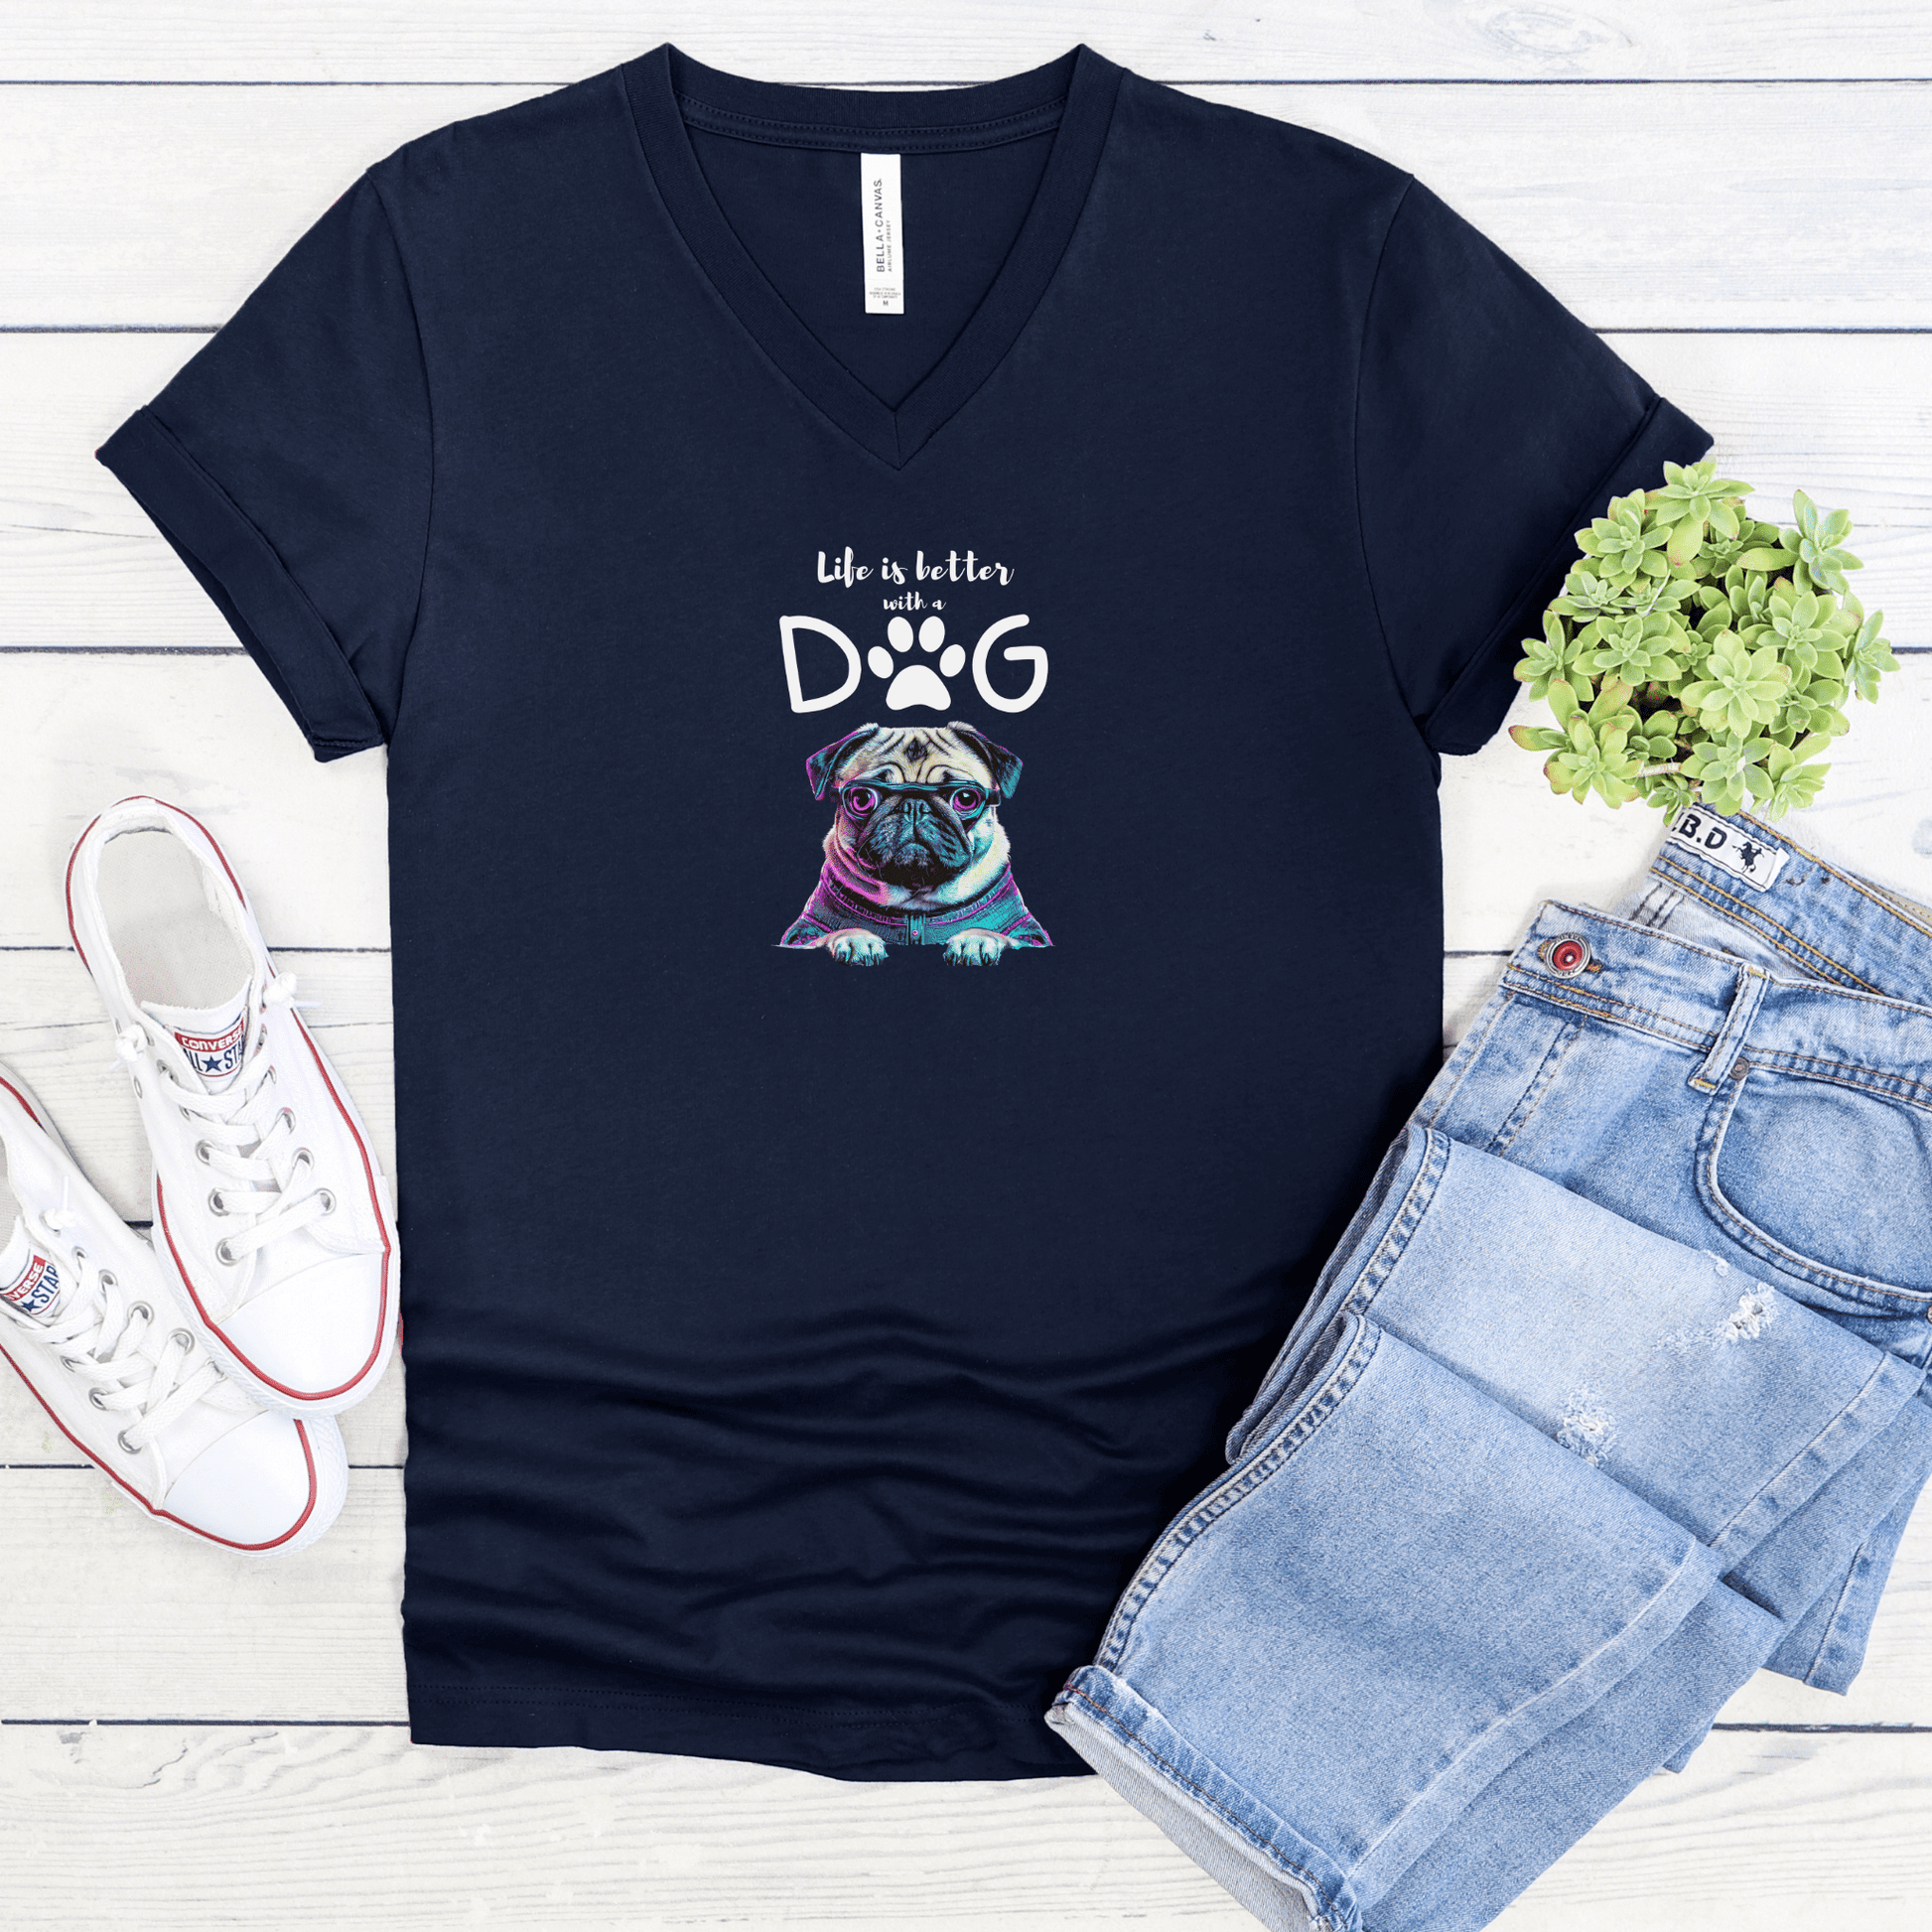 Life is Better with a Dog - Pug - Soulshinecreators